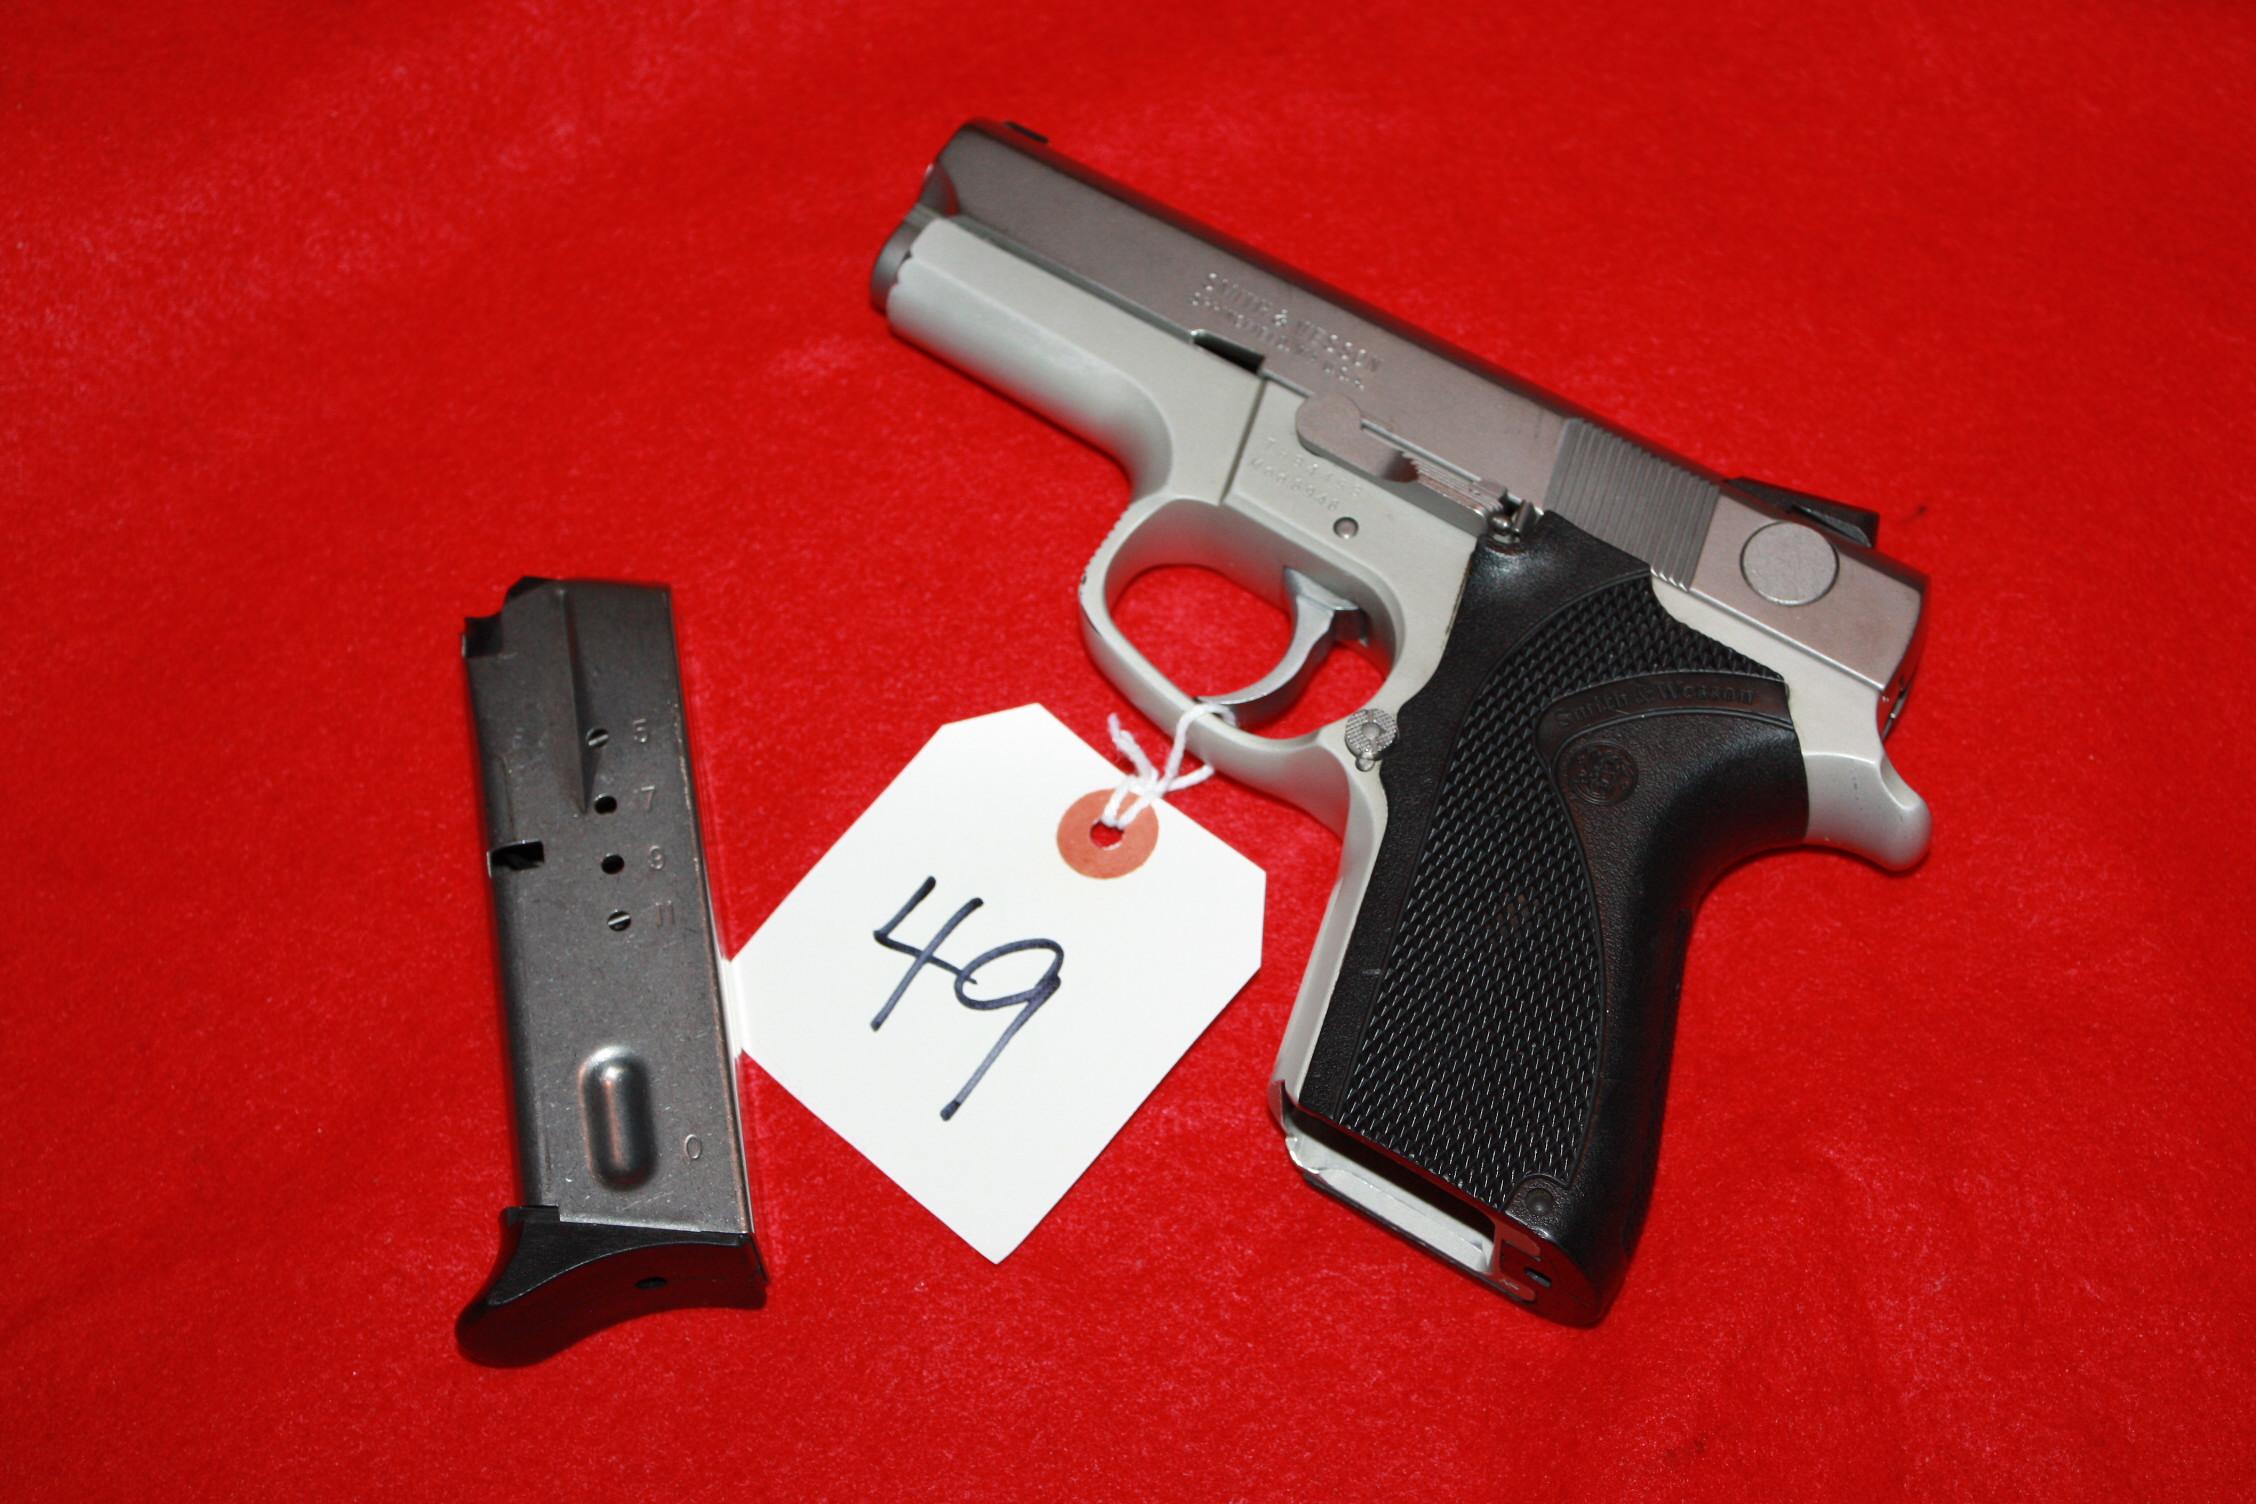 Smith & Wesson 6946 9mm Pistol